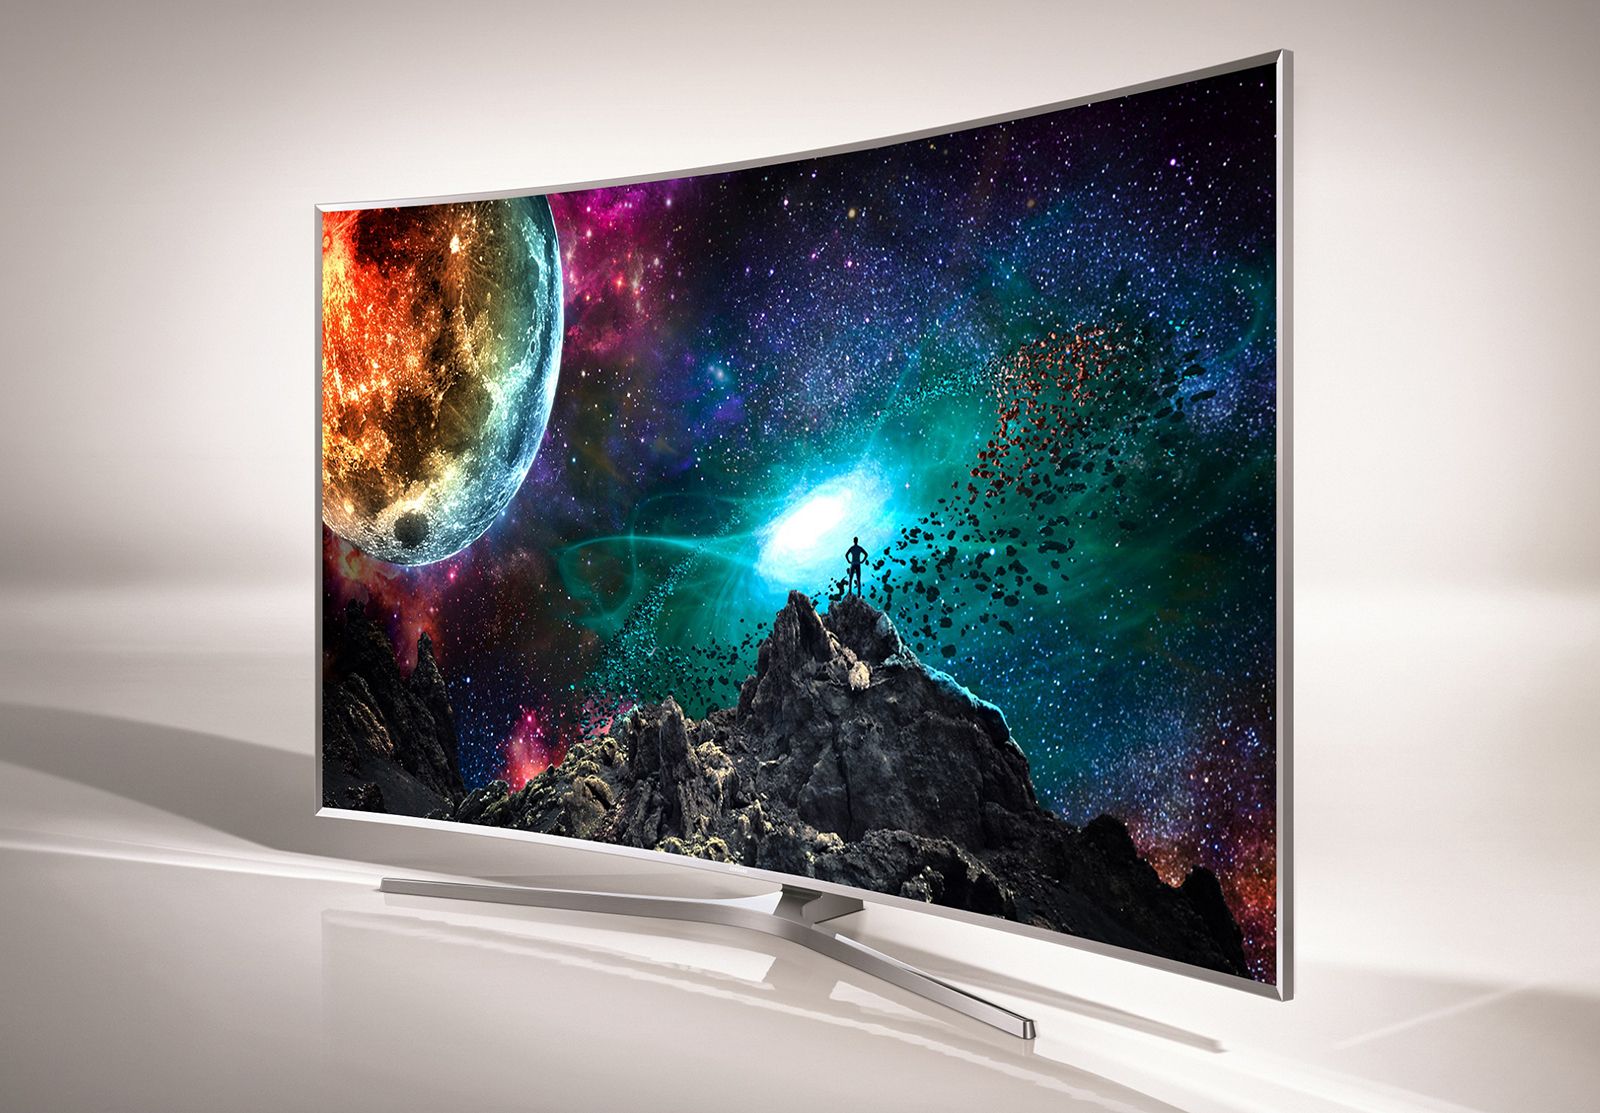 exciting times samsung vp robert king talks 4k curved tv and why the internet of things needs to be open platform image 4